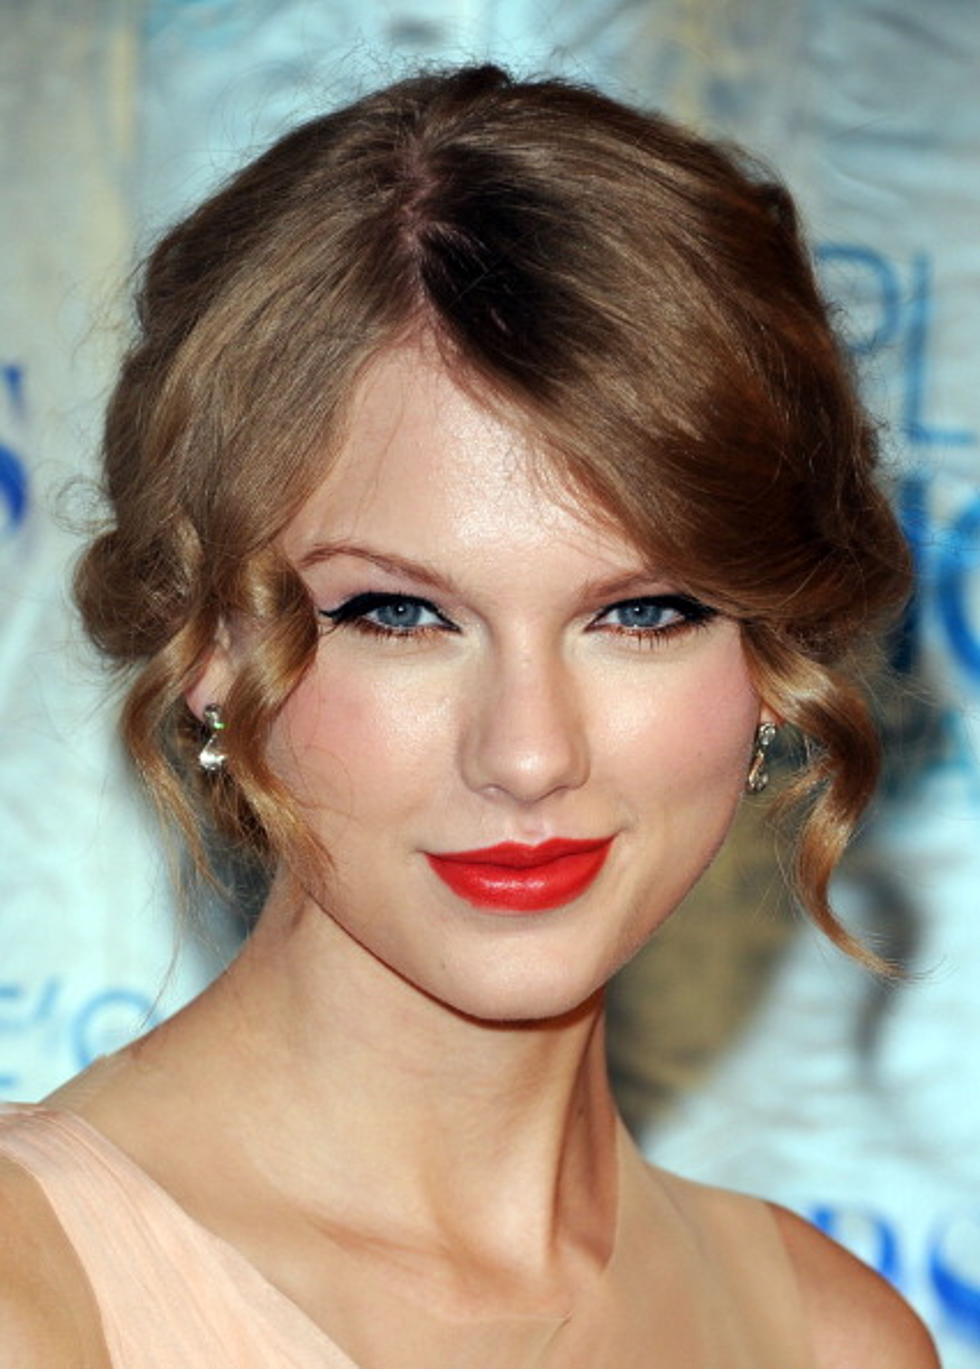 Taylor Swift Spotted With ‘Glee’ Star